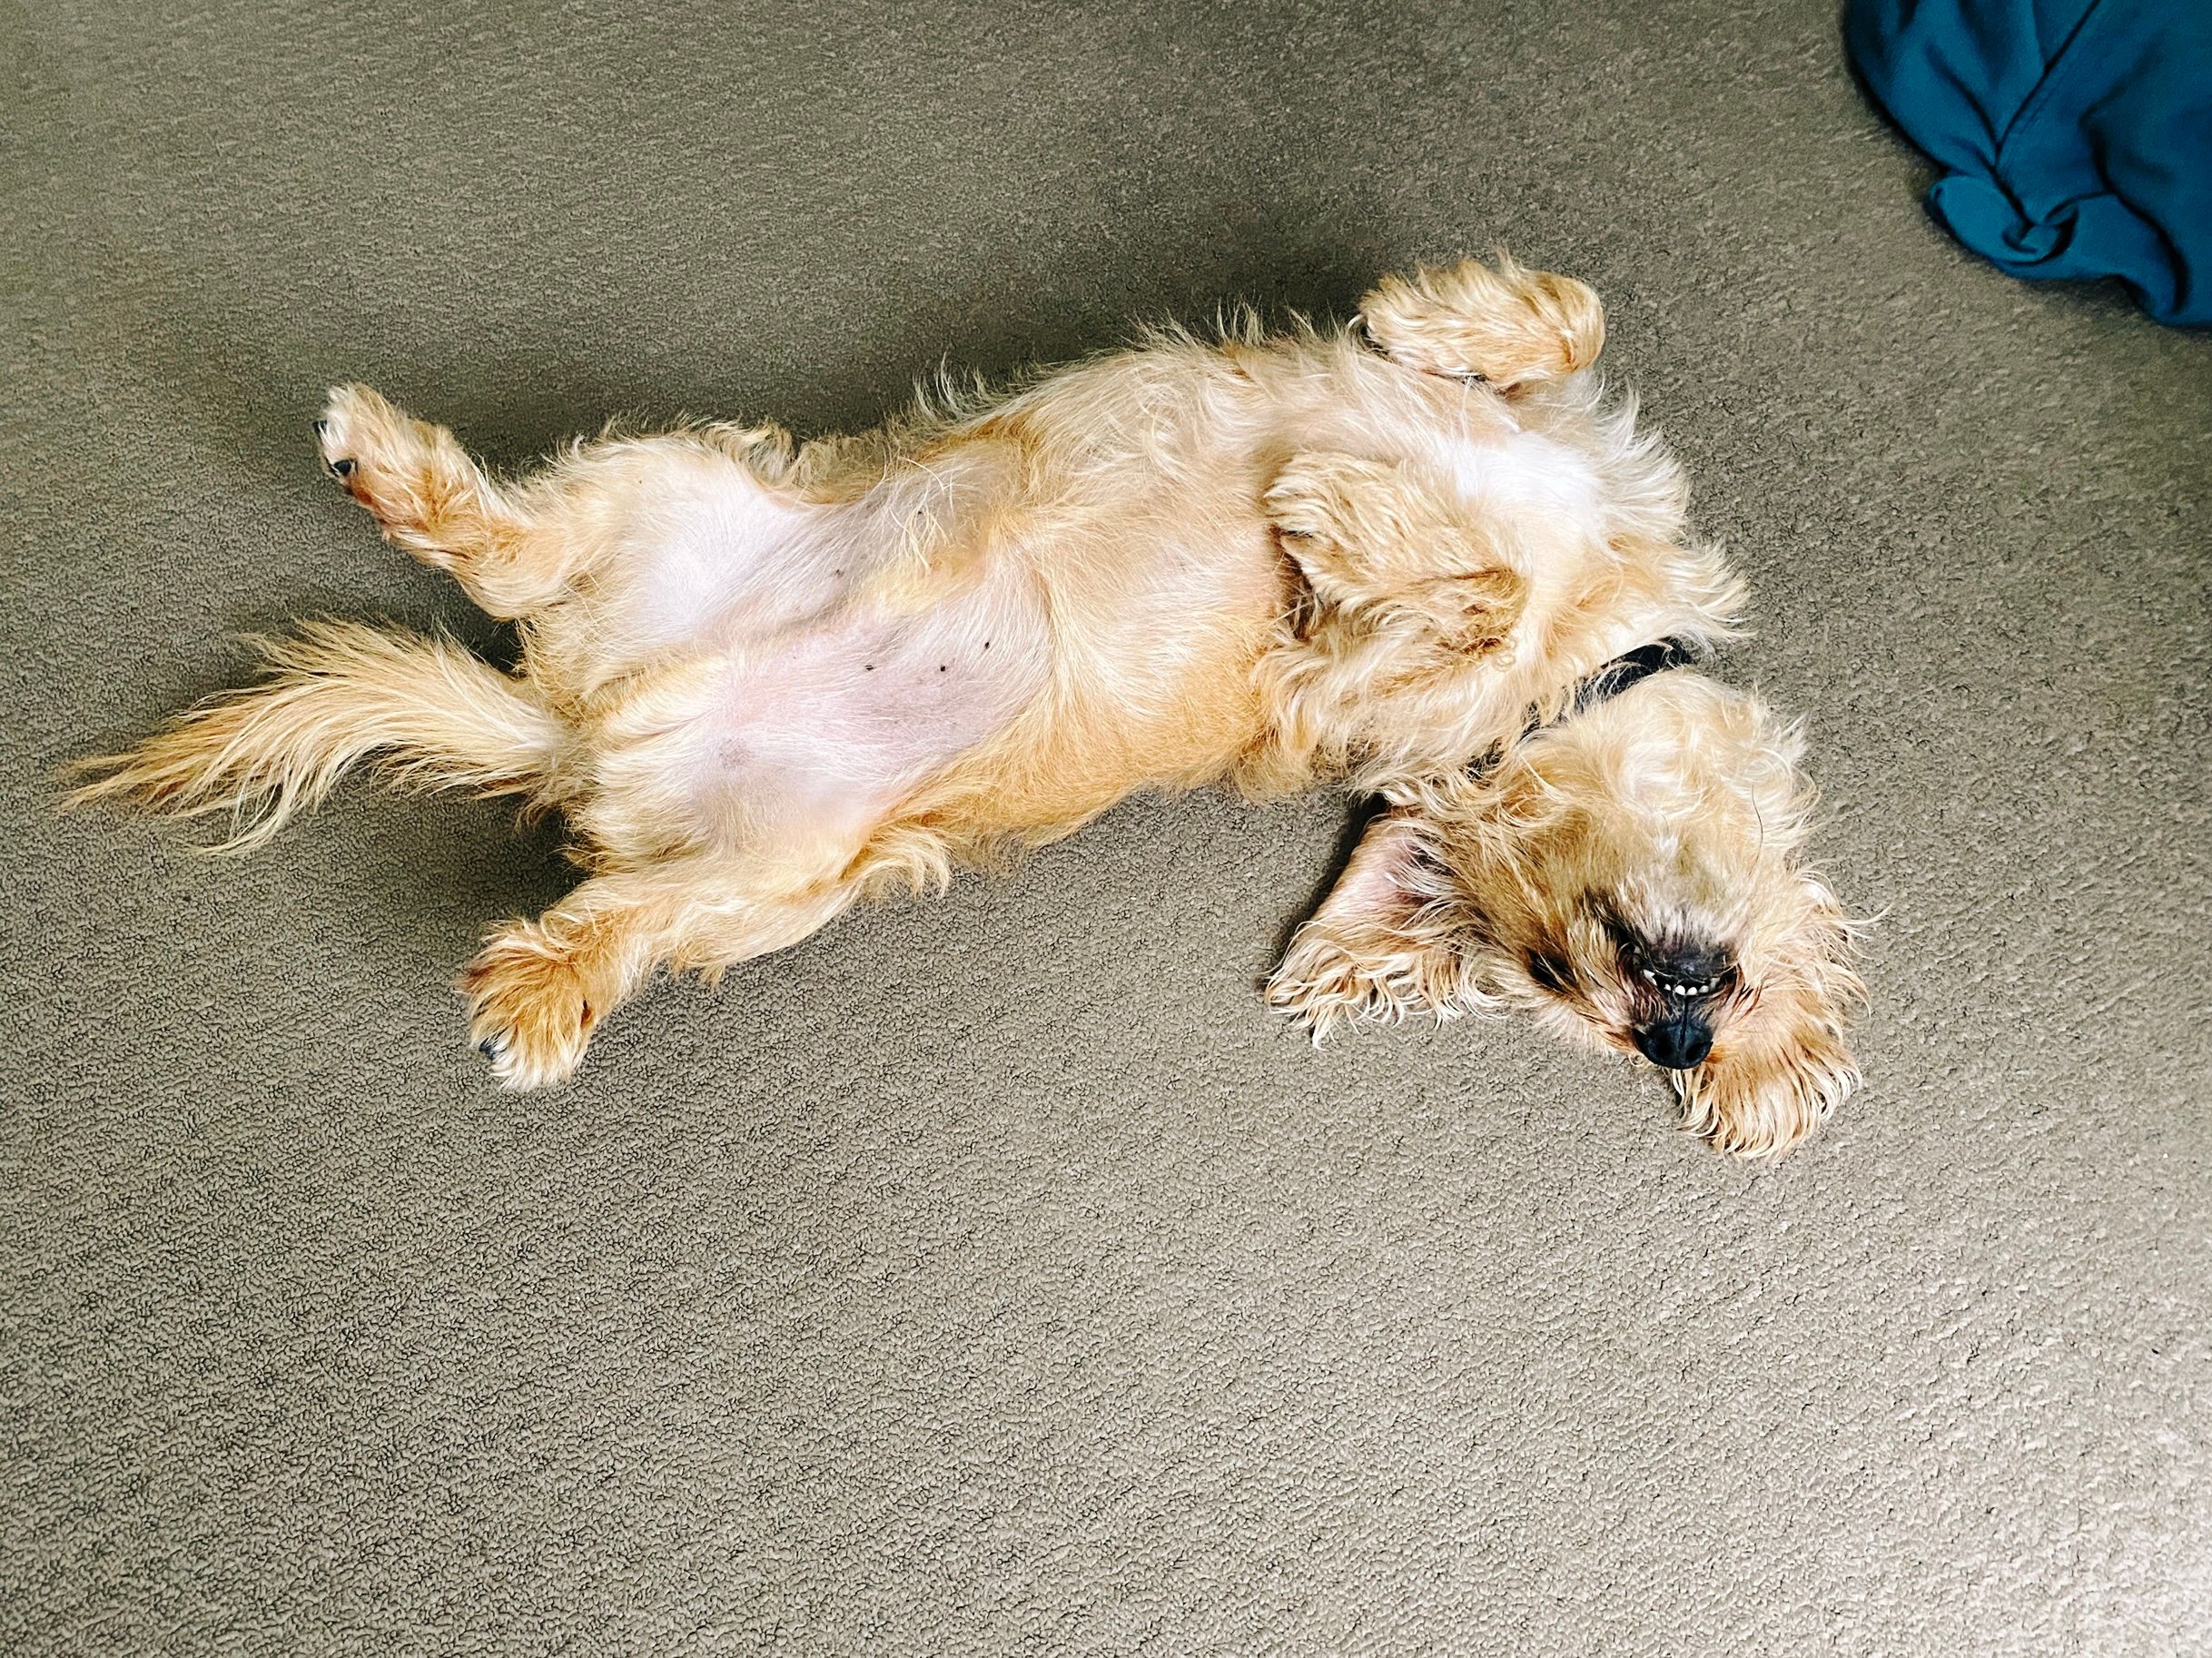 A photo of a small scruffy blonde dog lying upside down on the floor, and you can see his little teeth.